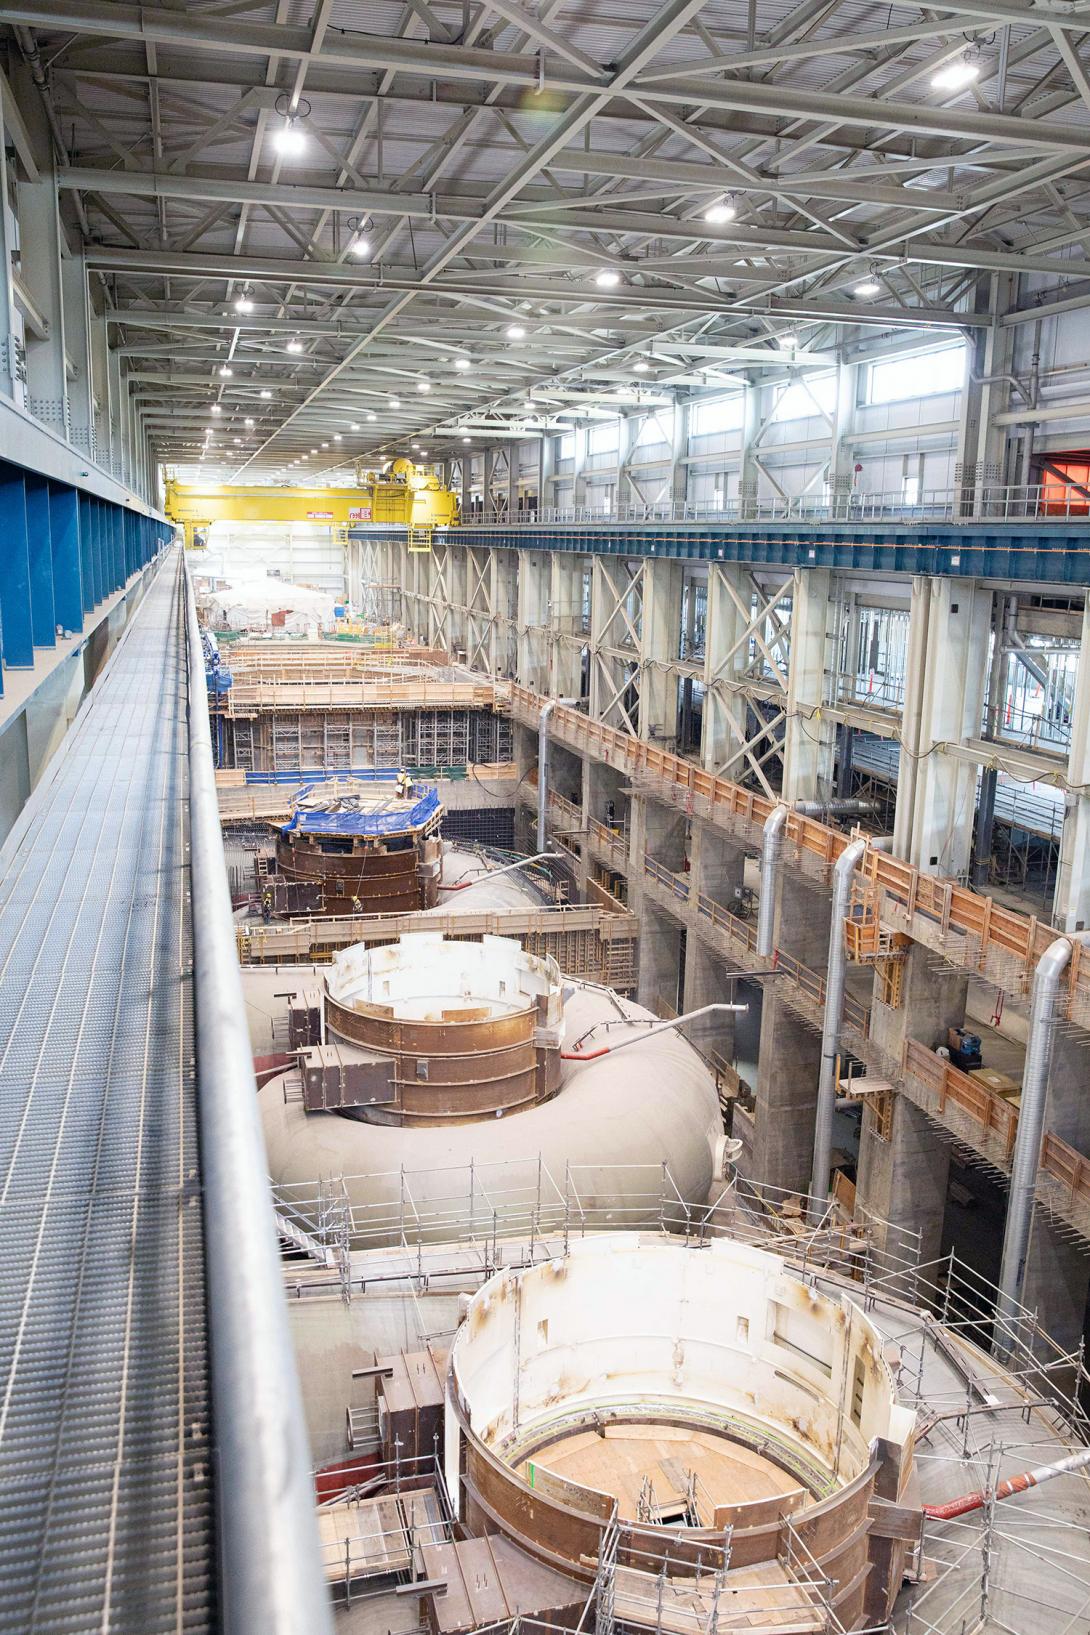 A wide view of main service bay and units 5 through 1. | August 2022